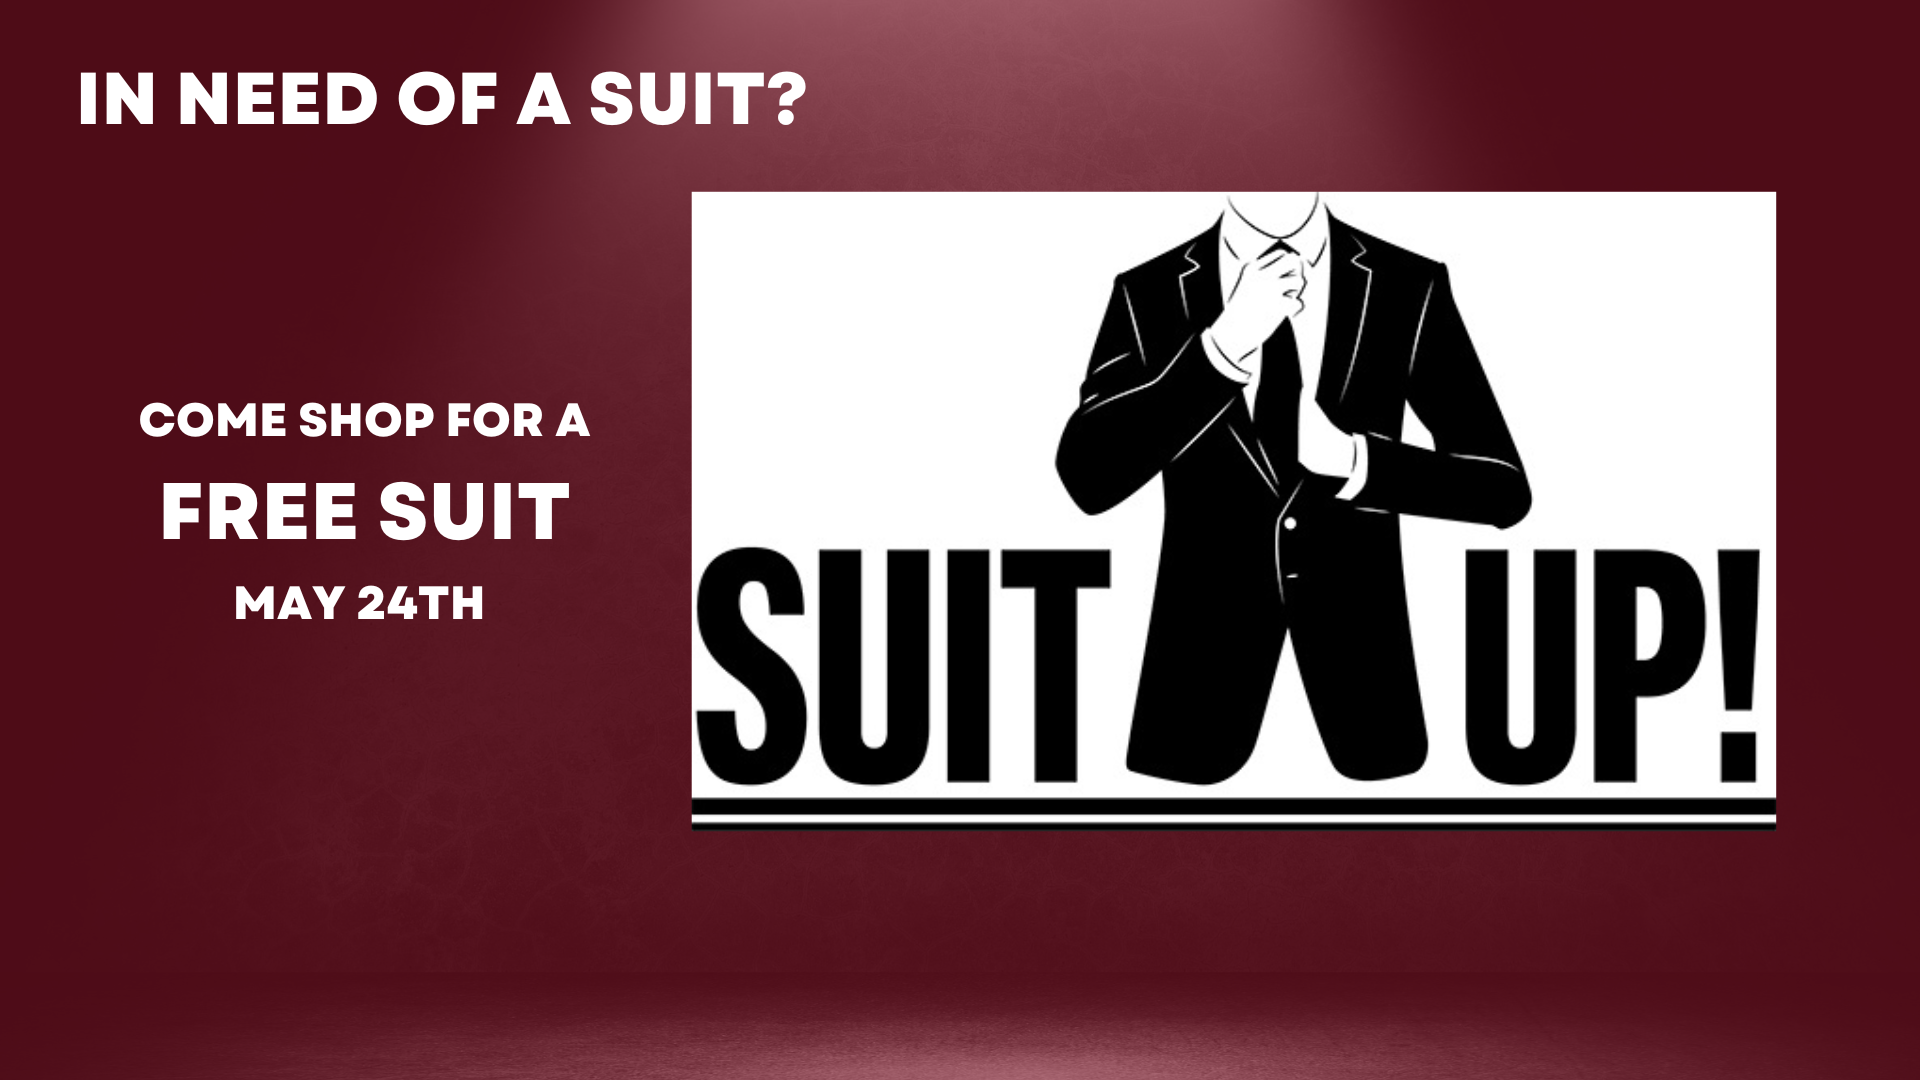 Need a suit? Attend Suit Up Shopping Day on May 24!